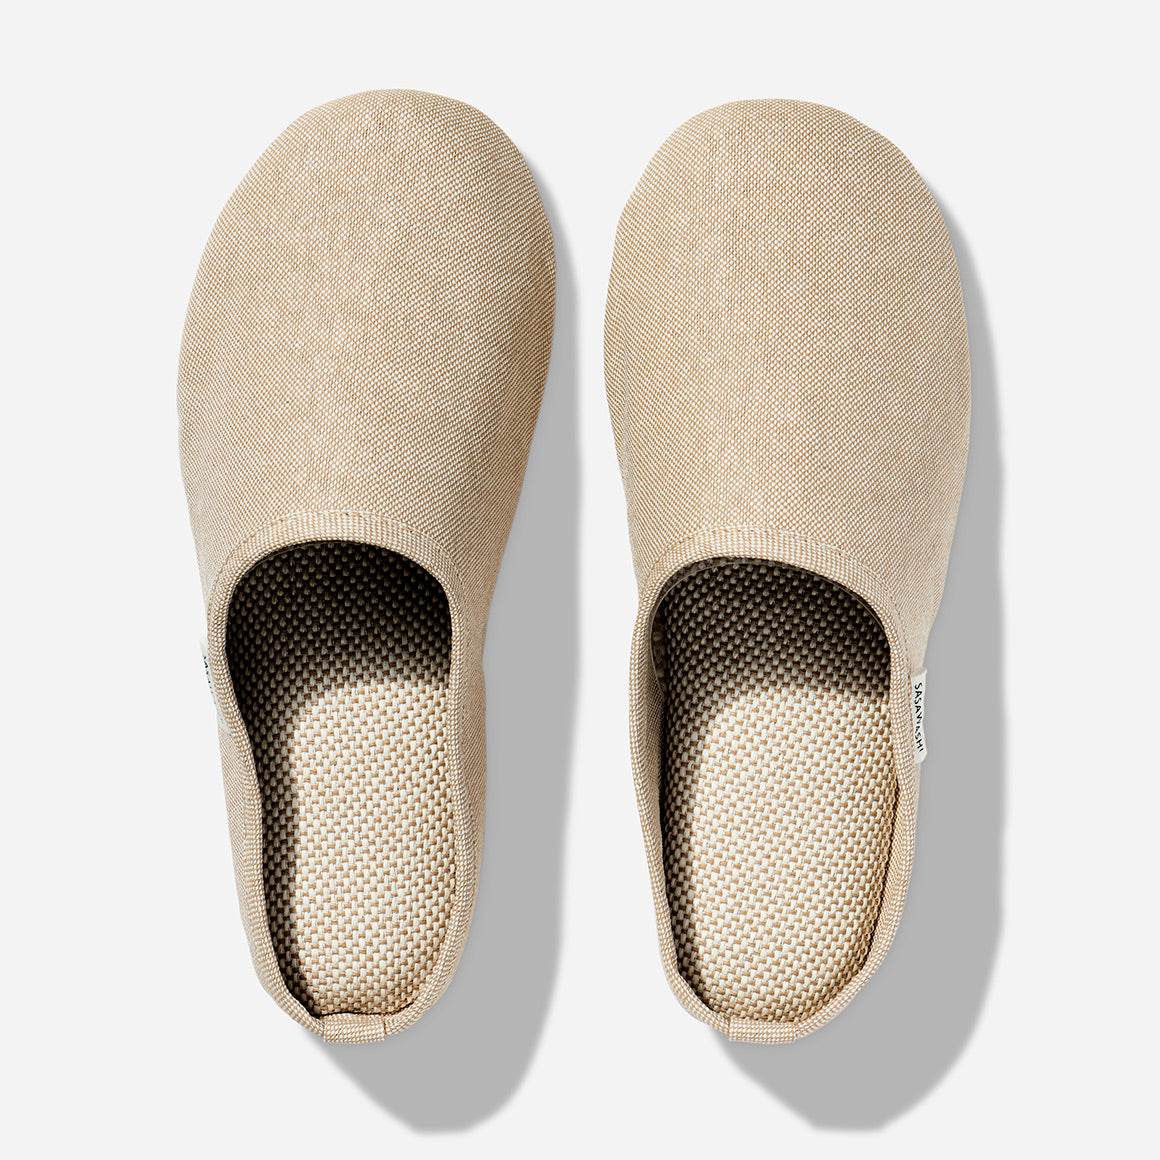 Japanese-style room slippers in beige colorway photographed against a white background. Each slipper has Saswashi written on tag near foot opening.